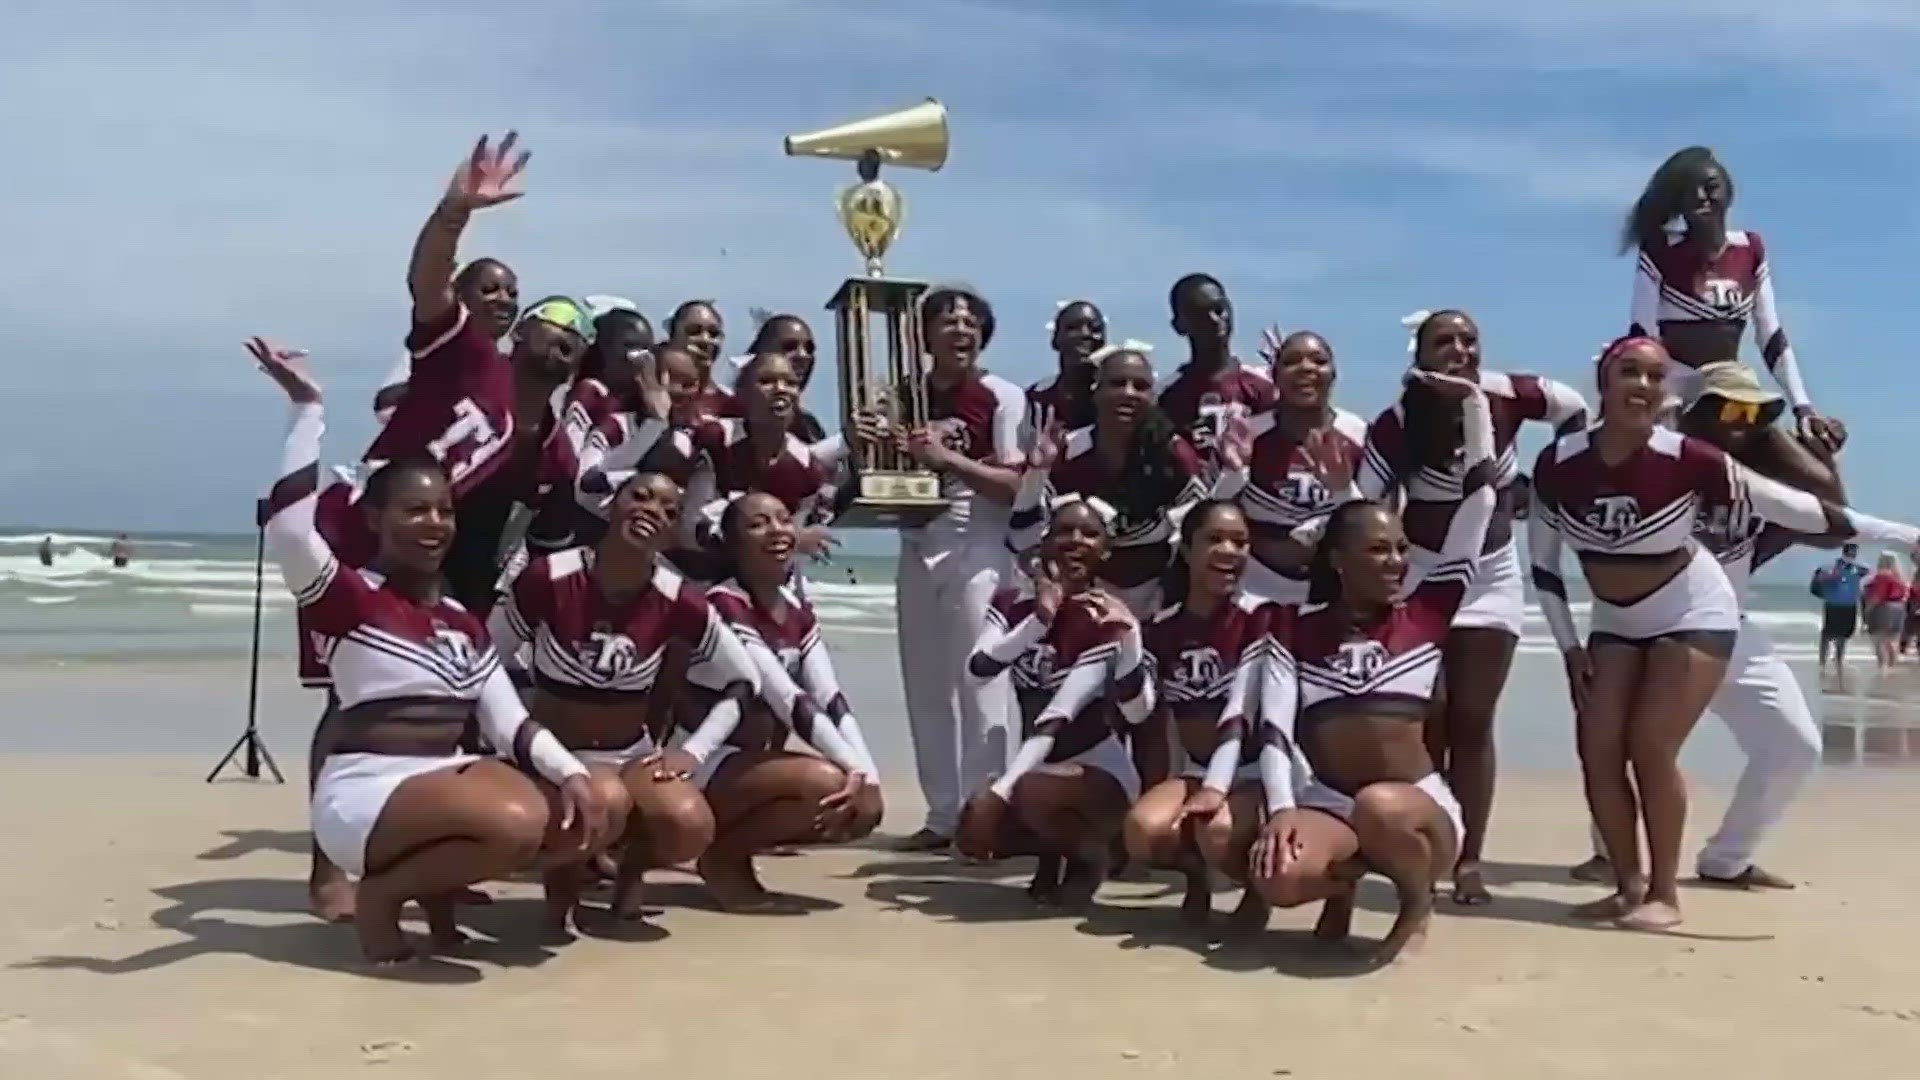 The Texas Southern cheerleaders made history on Friday in Florida, becoming the first historically Black college or university to win the national championship.